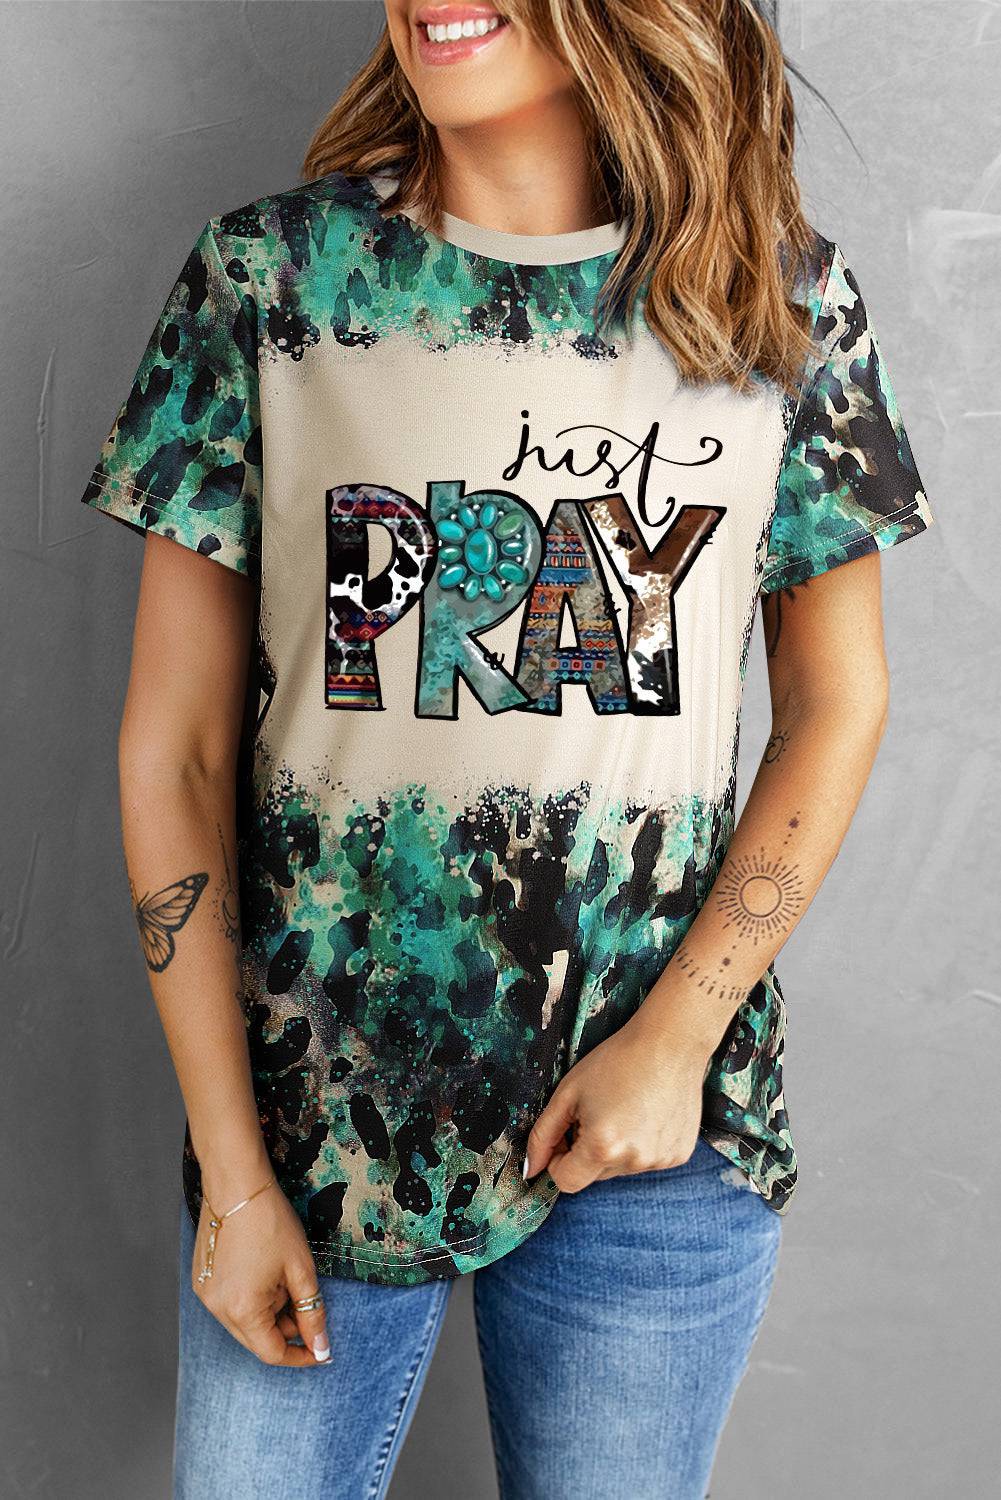 Just Pray Graphic Tee Shirt - Express Your Faith with Romantic Style - Feel the Love and Warmth of True Faith - Guy Christopher